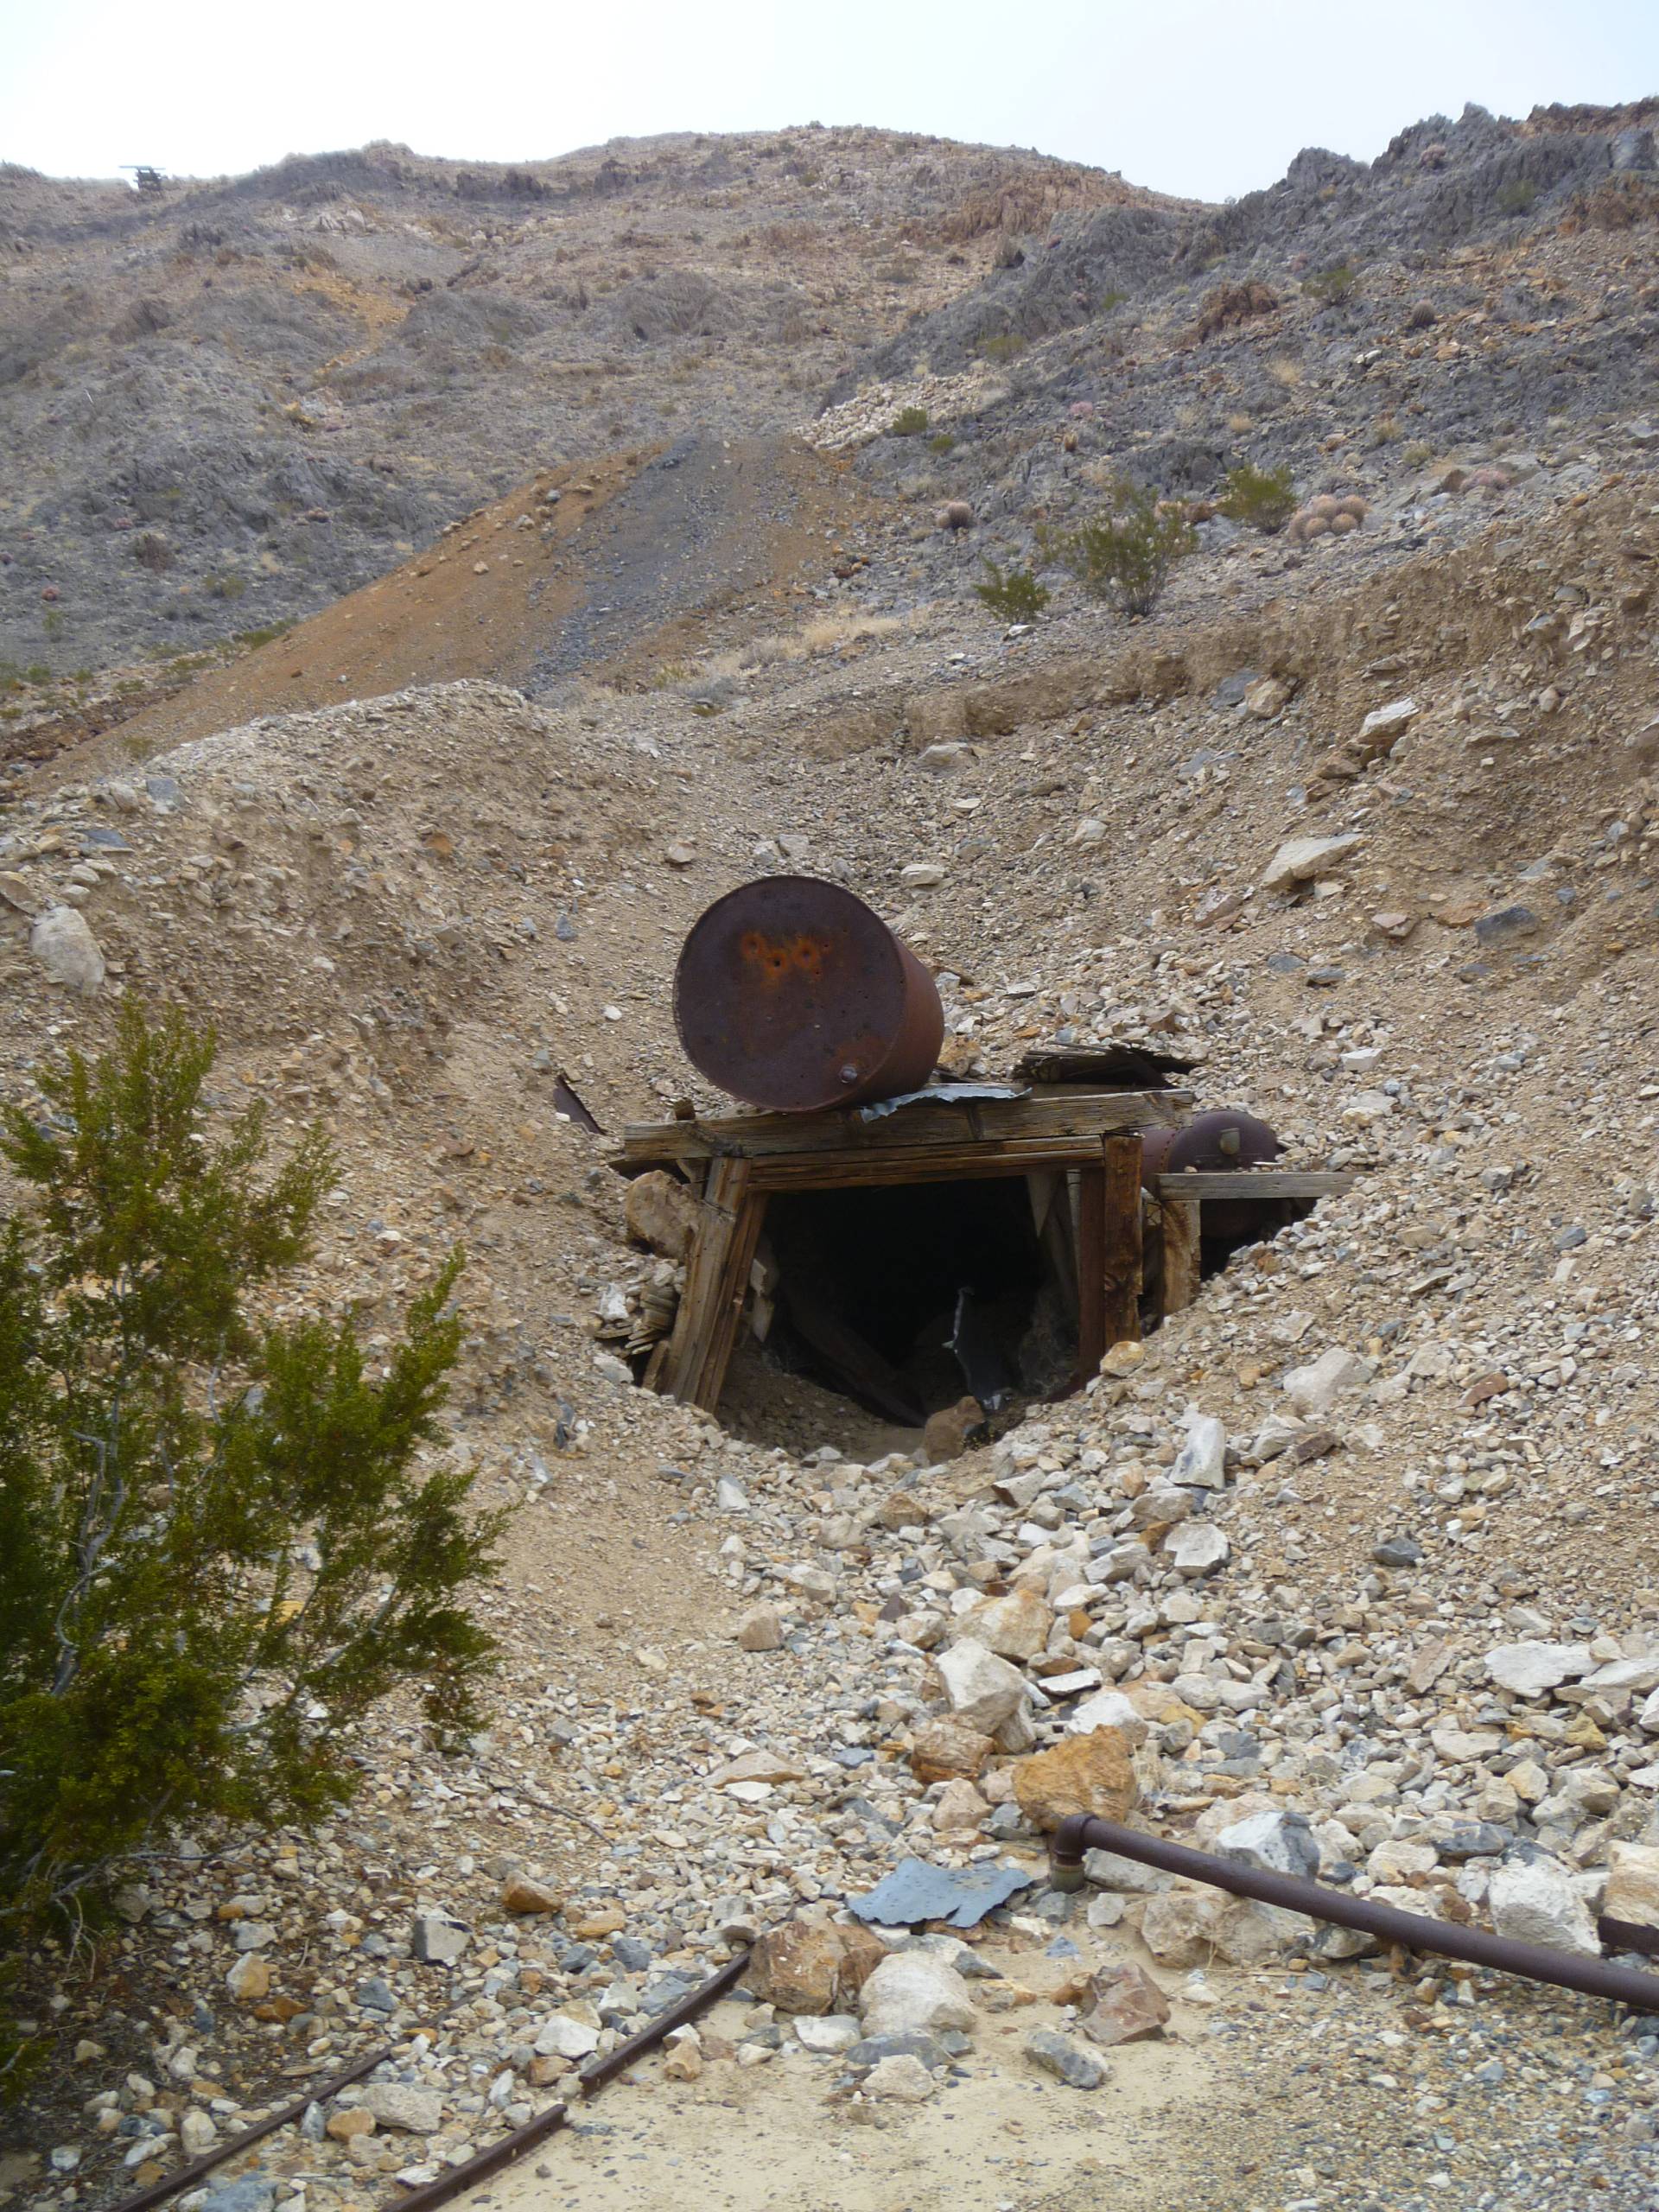 Tunnel at the Ubehebe Lead Mine, Death Valley National Park, California